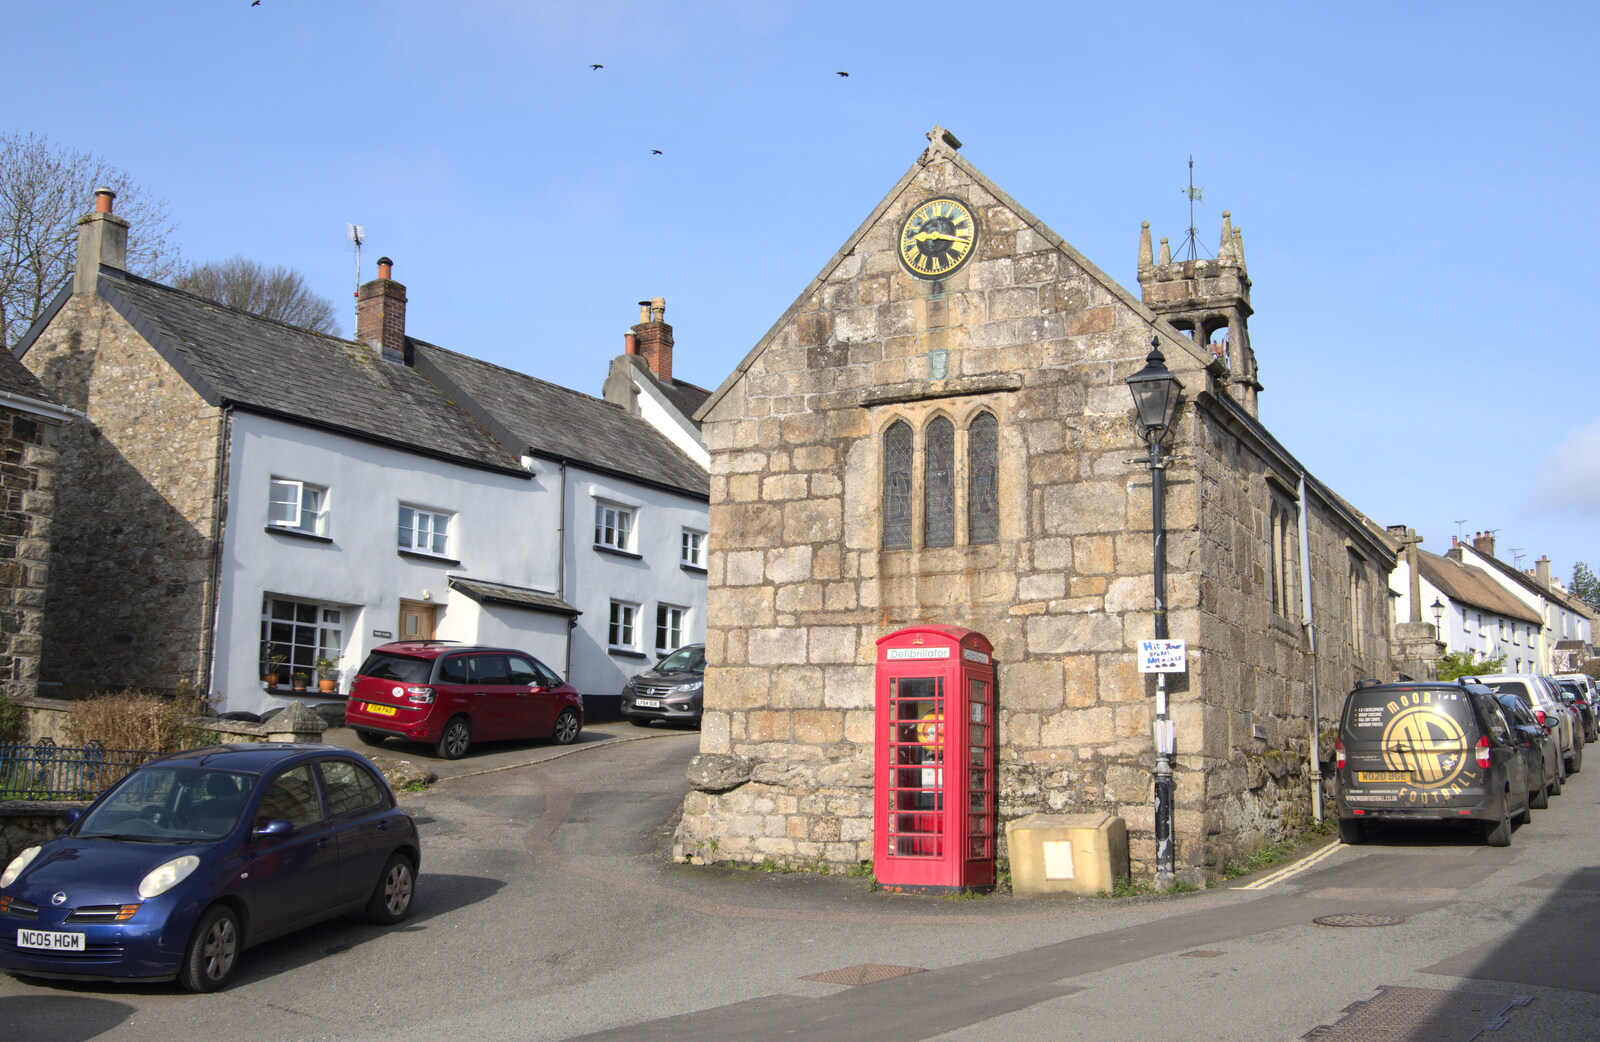 K6 phonebox and the chapel of St. Mary from Easter in South Zeal and Moretonhampstead, Devon - 9th April